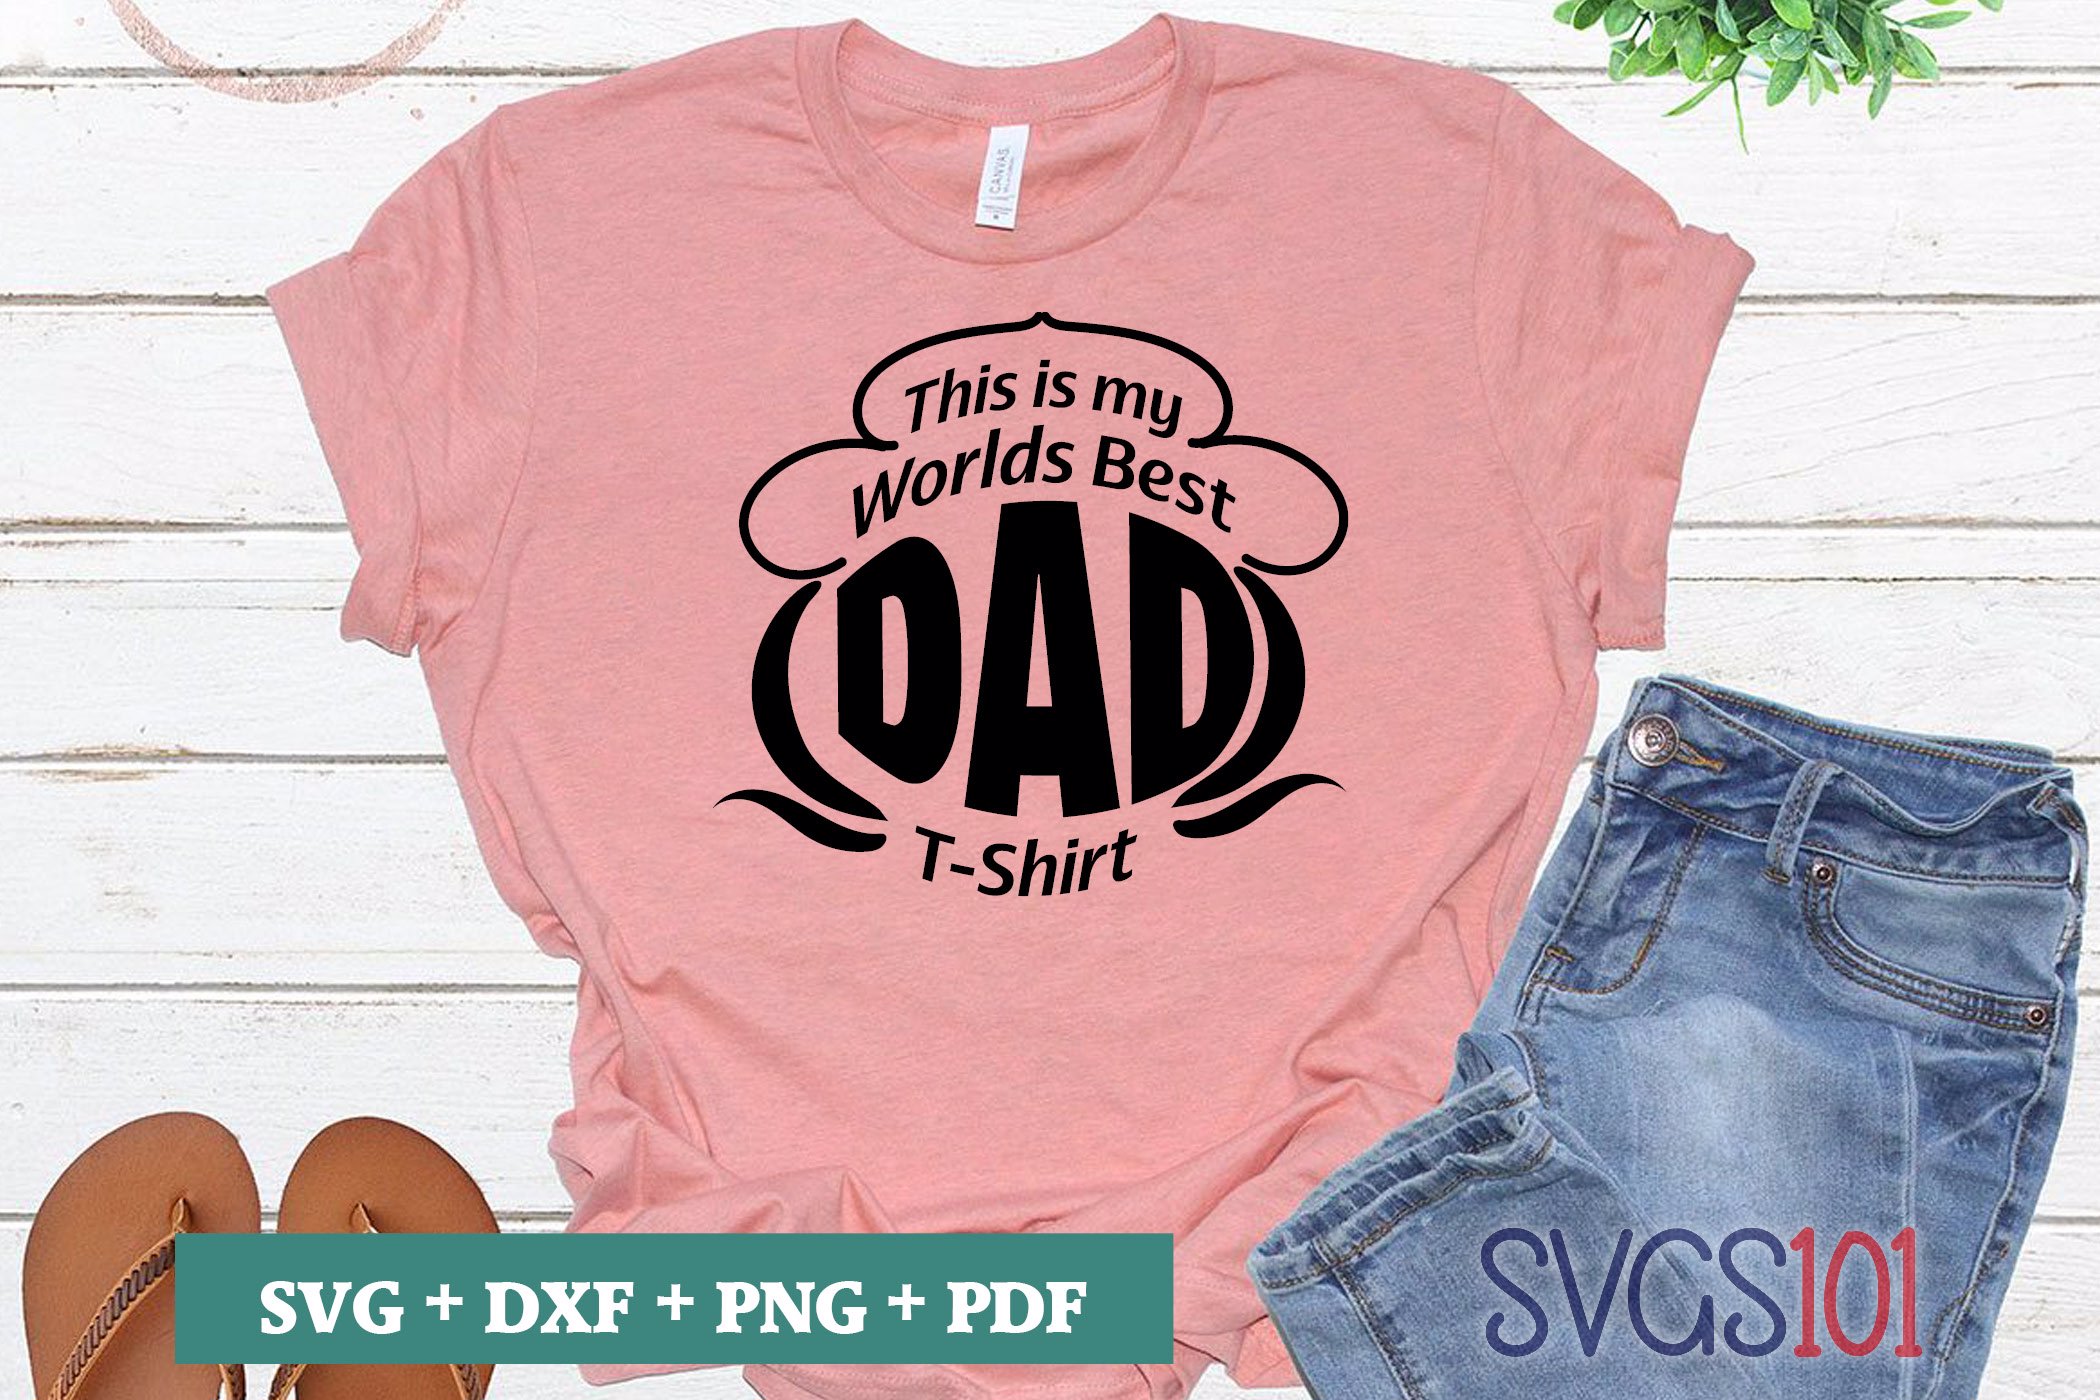 Download This Is My Worlds Best Dad T shirt SVG Cuttable file - DXF, EPS, PNG, PDF | SVG Cutting File